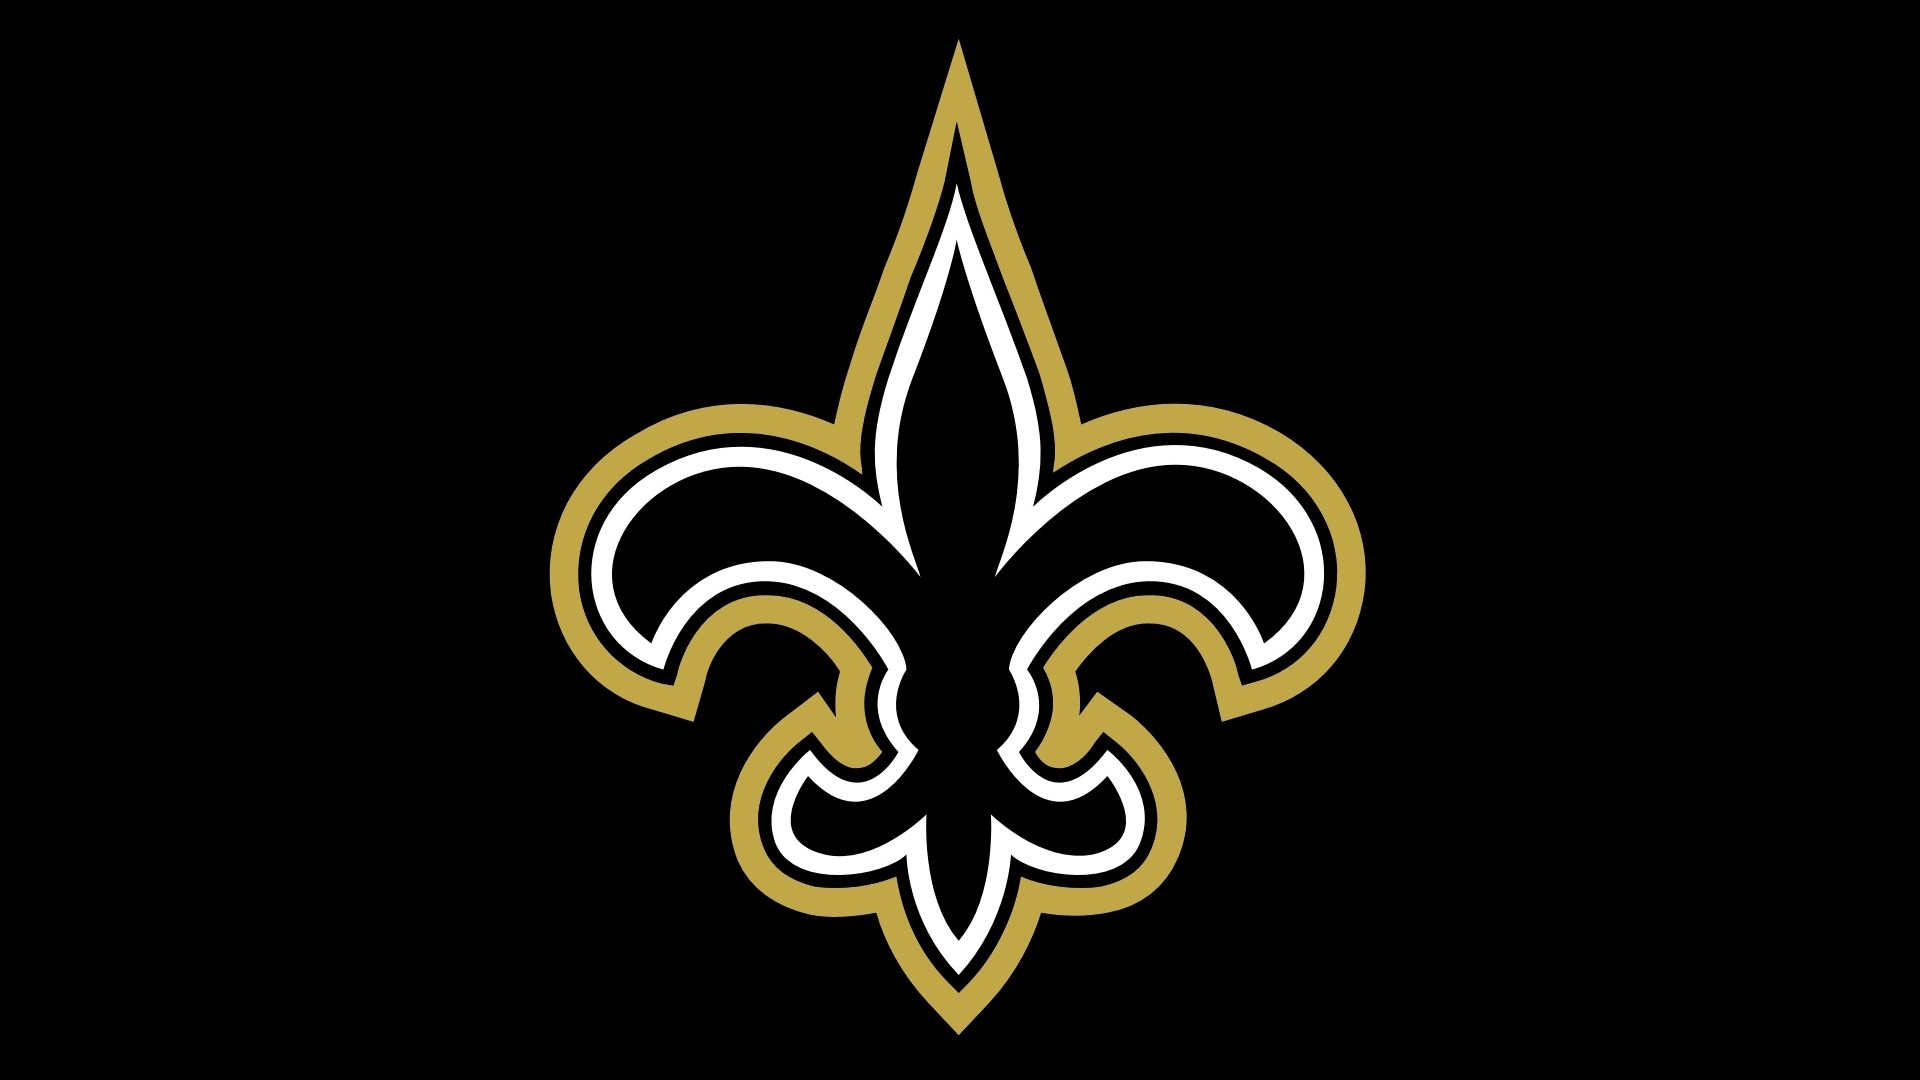 HD Backgrounds New Orleans Saints With Resolution 1920X1080 pixel. You can make this wallpaper for your Mac or Windows Desktop Background, iPhone, Android or Tablet and another Smartphone device for free